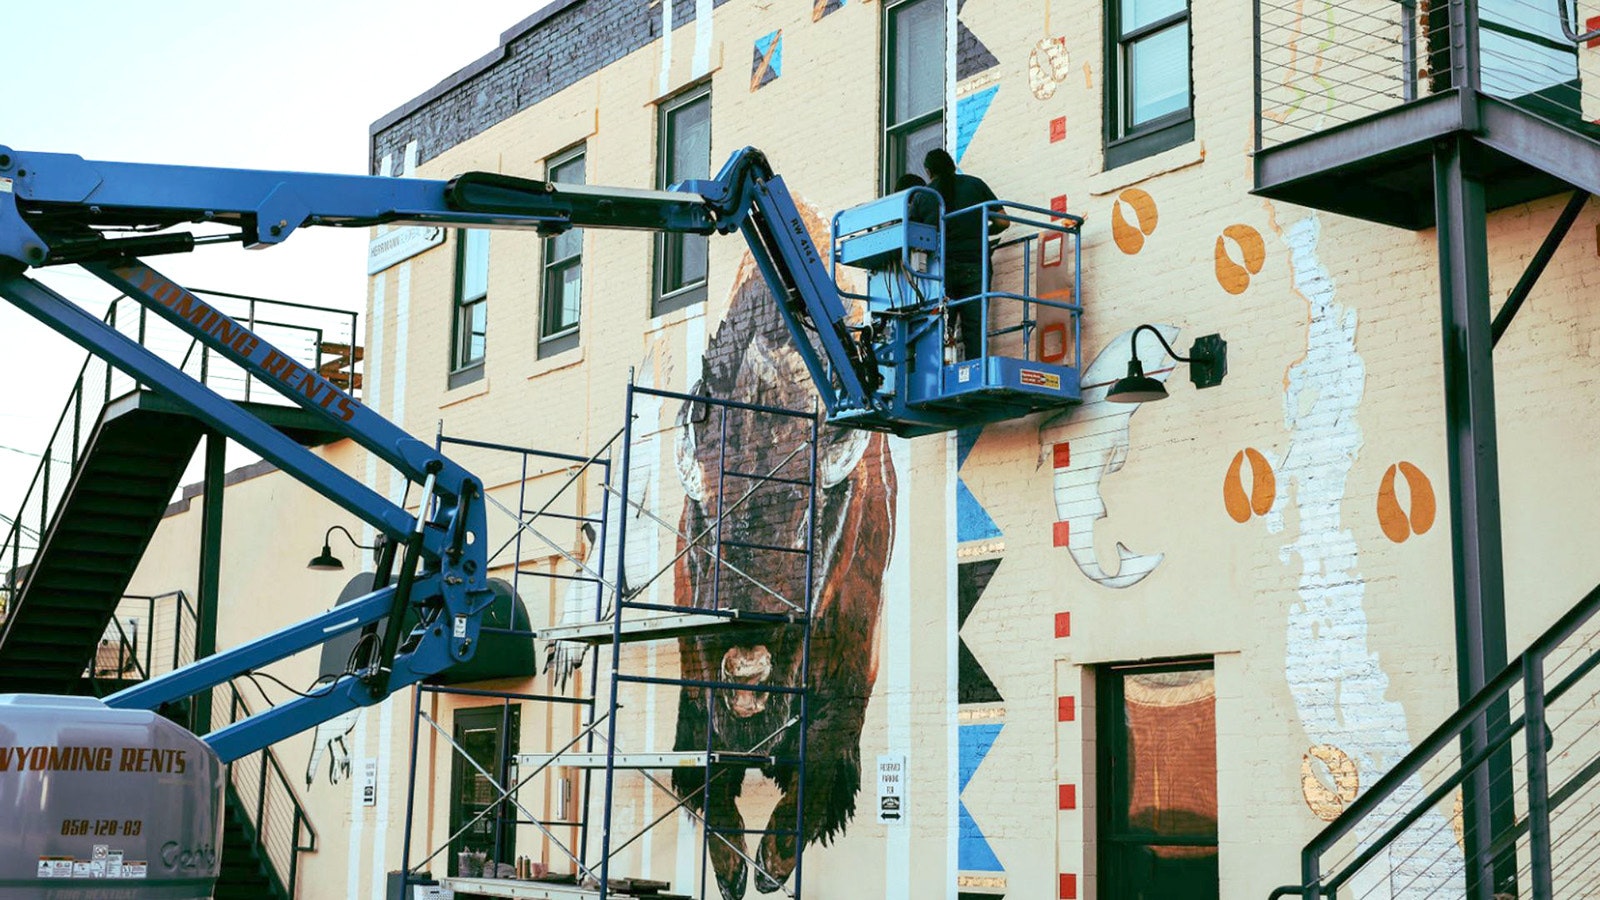 An artist works to create a large mural on a building in downtown Lander.